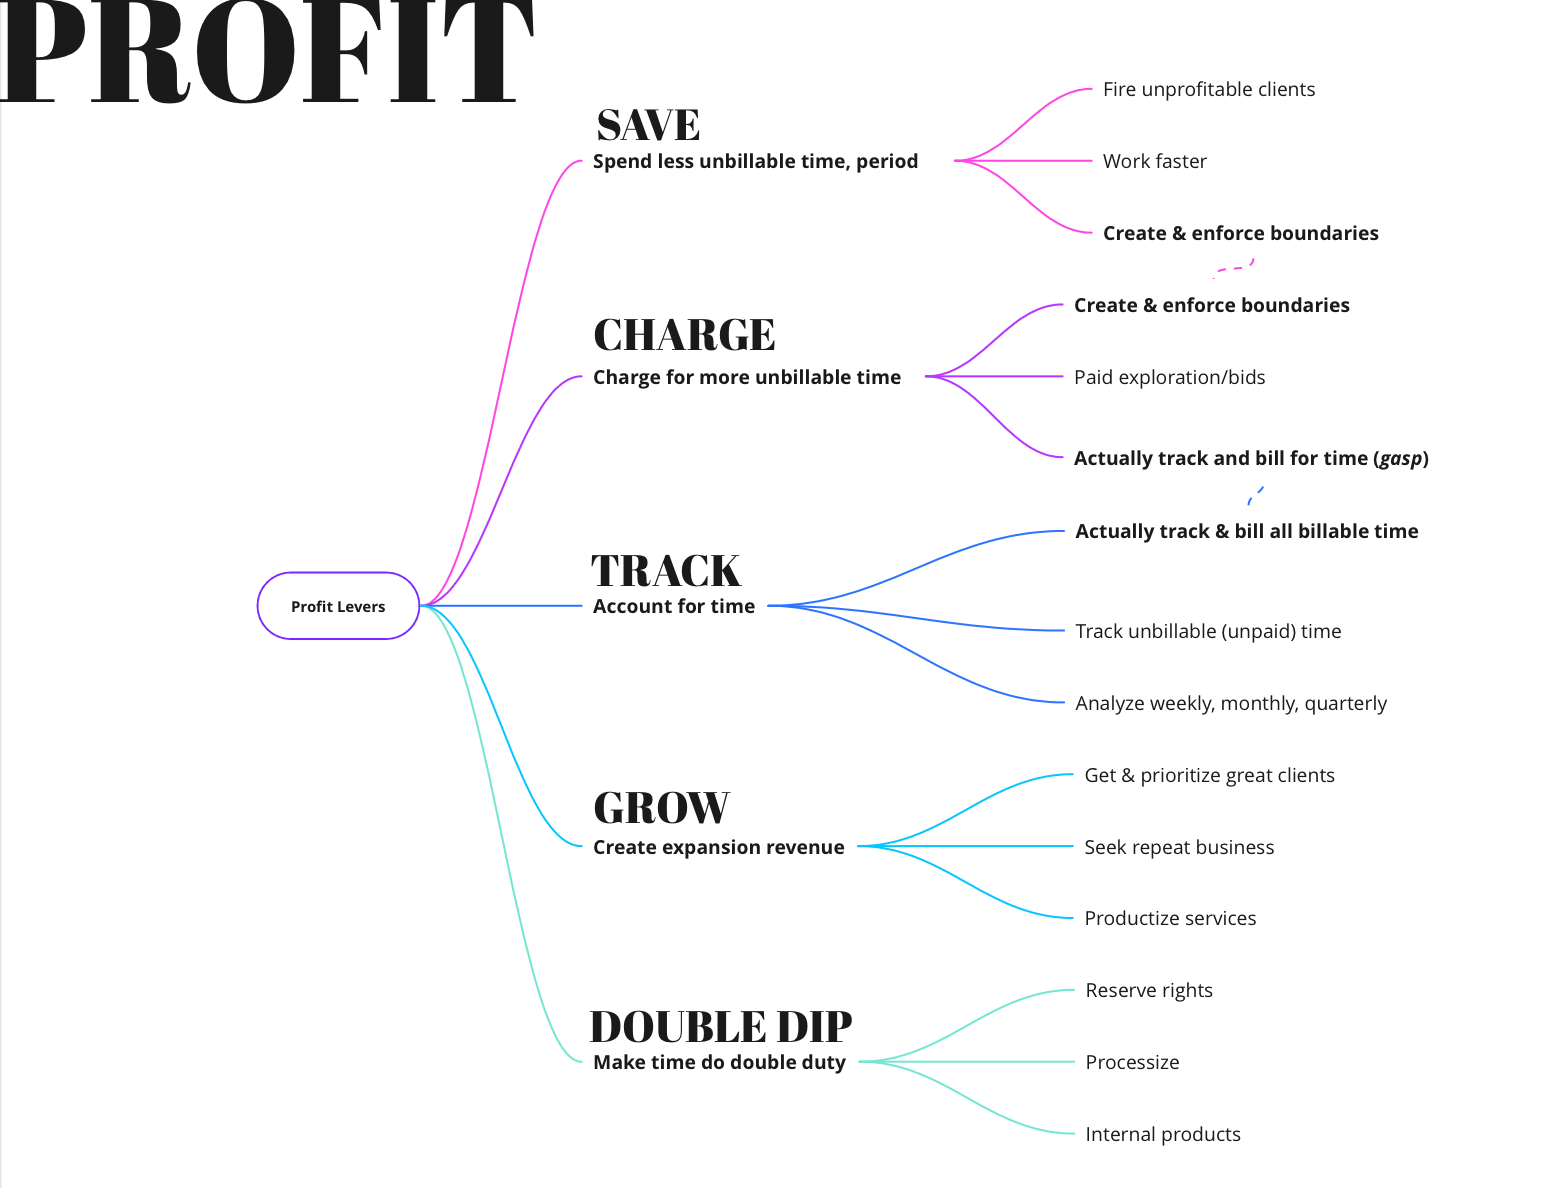 Mindmap titled Profit. Sections are: Save, charge, track, grow, double dip.